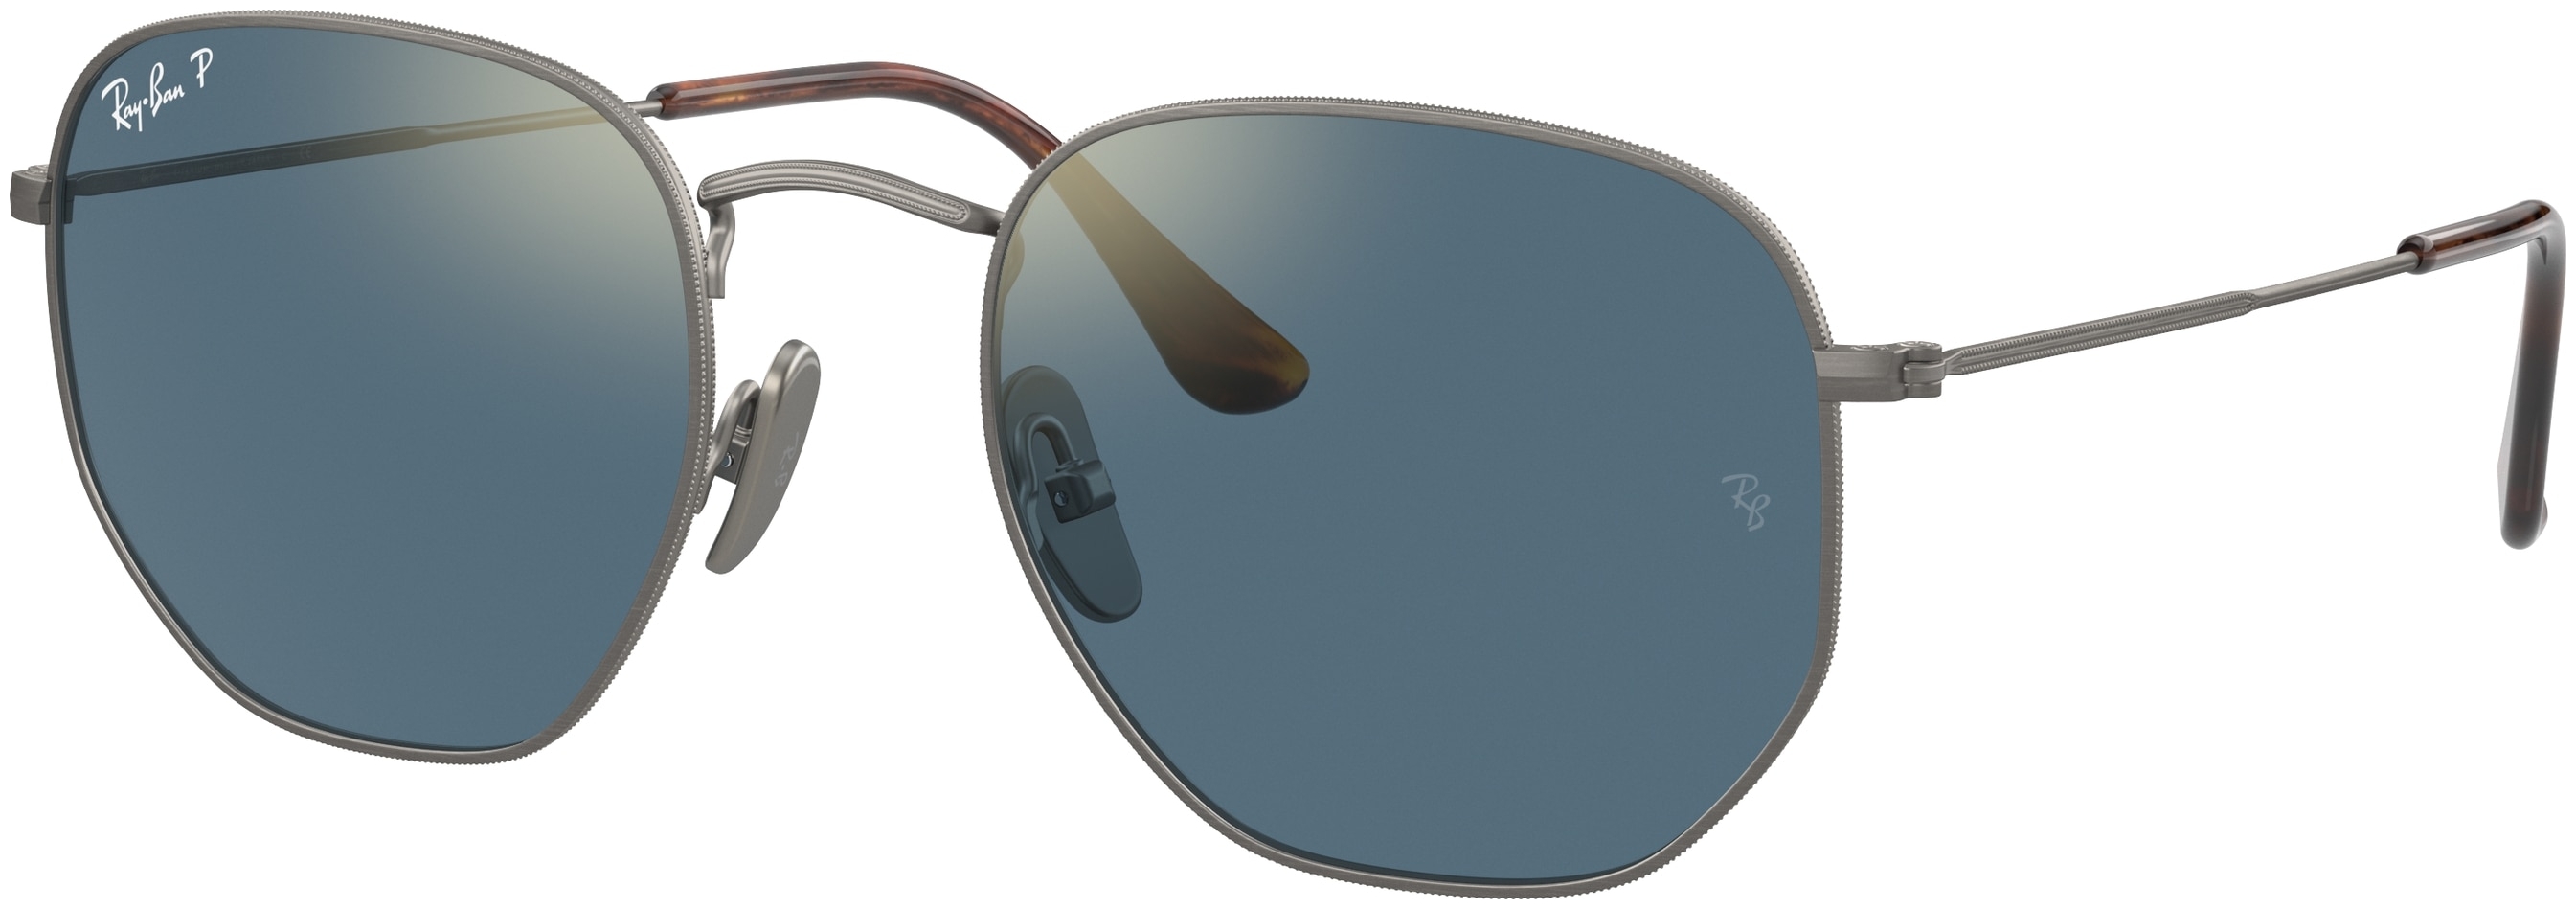  Ray-Ban  RB8148 9208T0